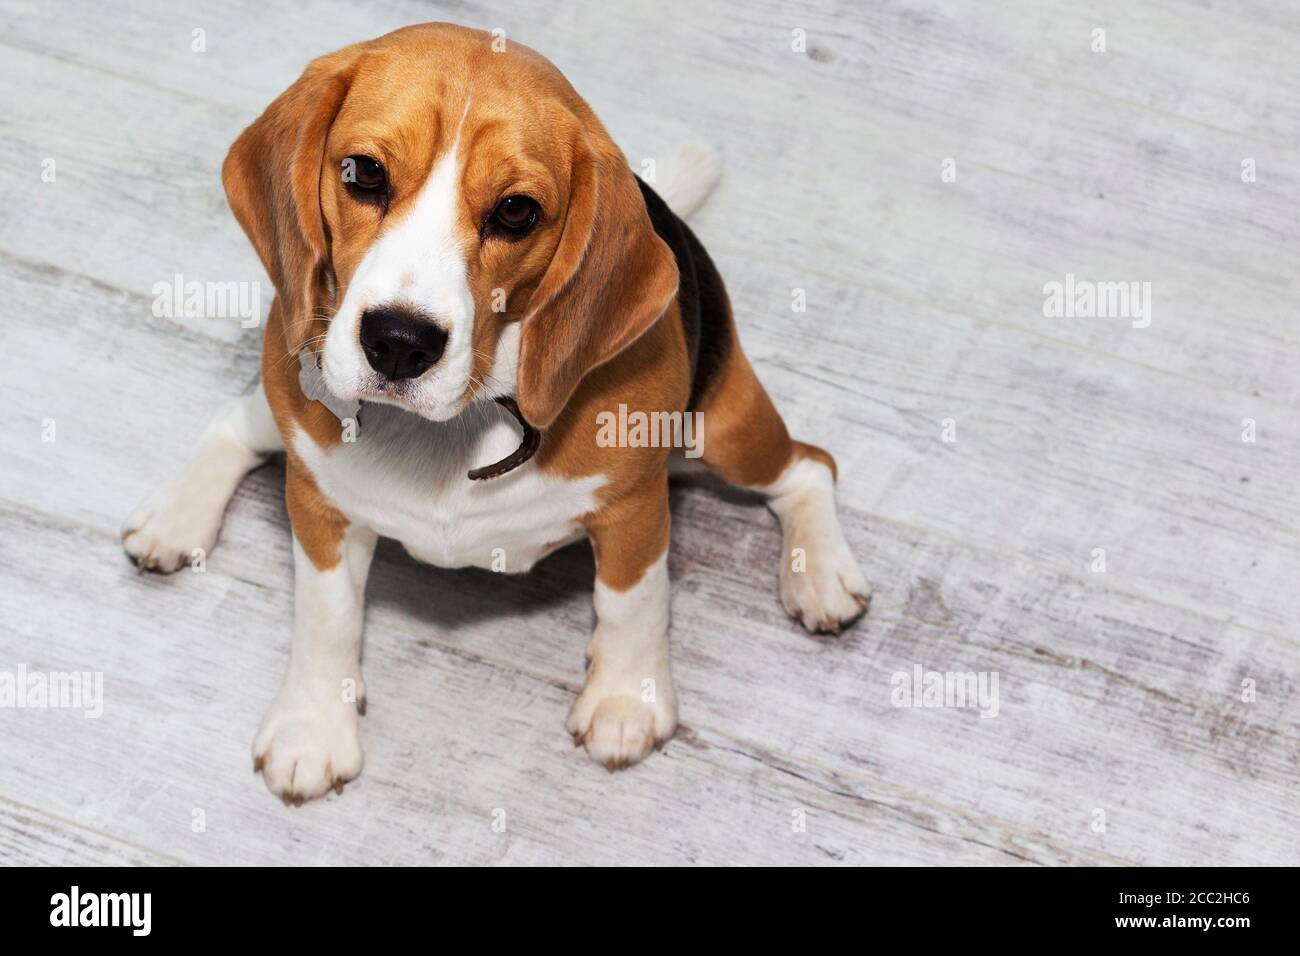 a fat Beagle dog sits on the floor and waits for food. Stock Photo